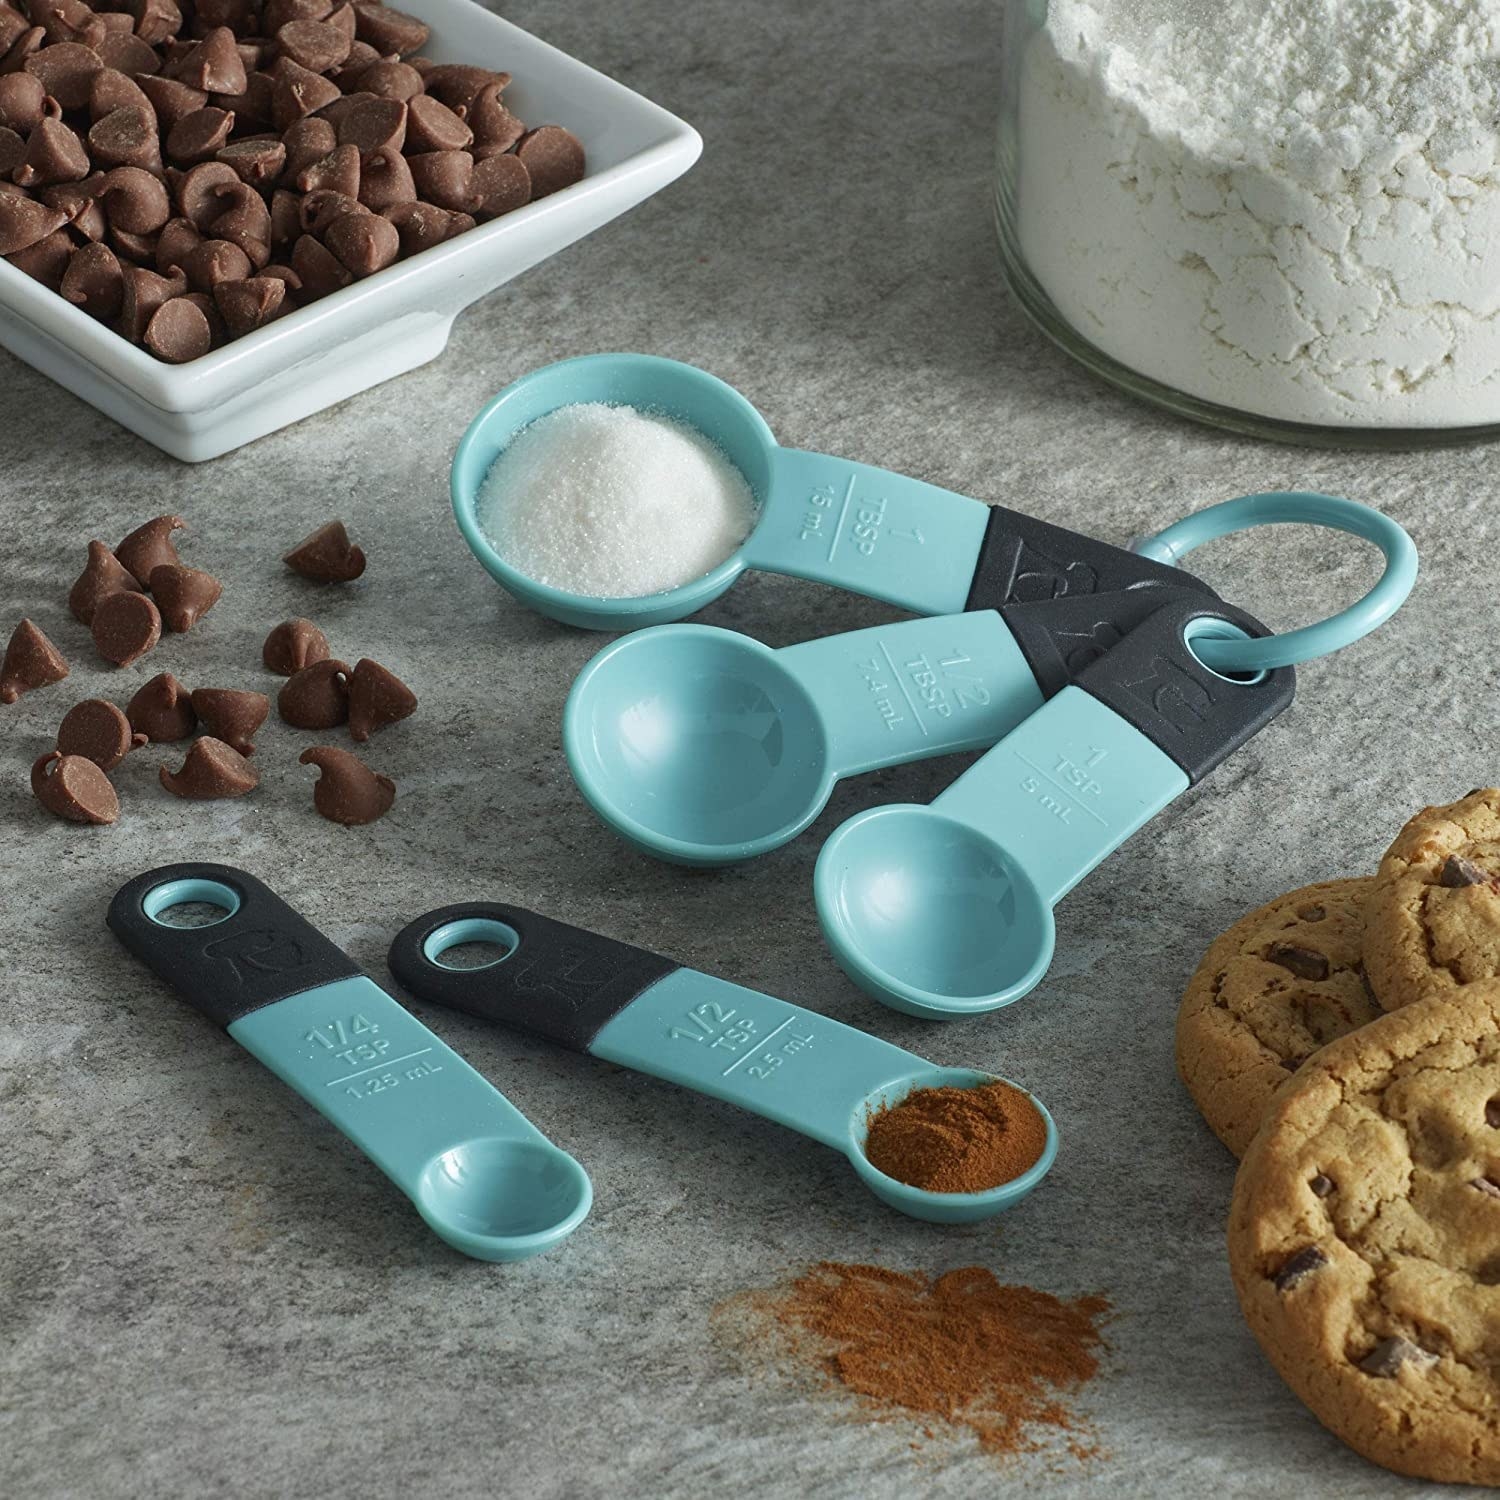 A set of plastic measuring spoons on a counter